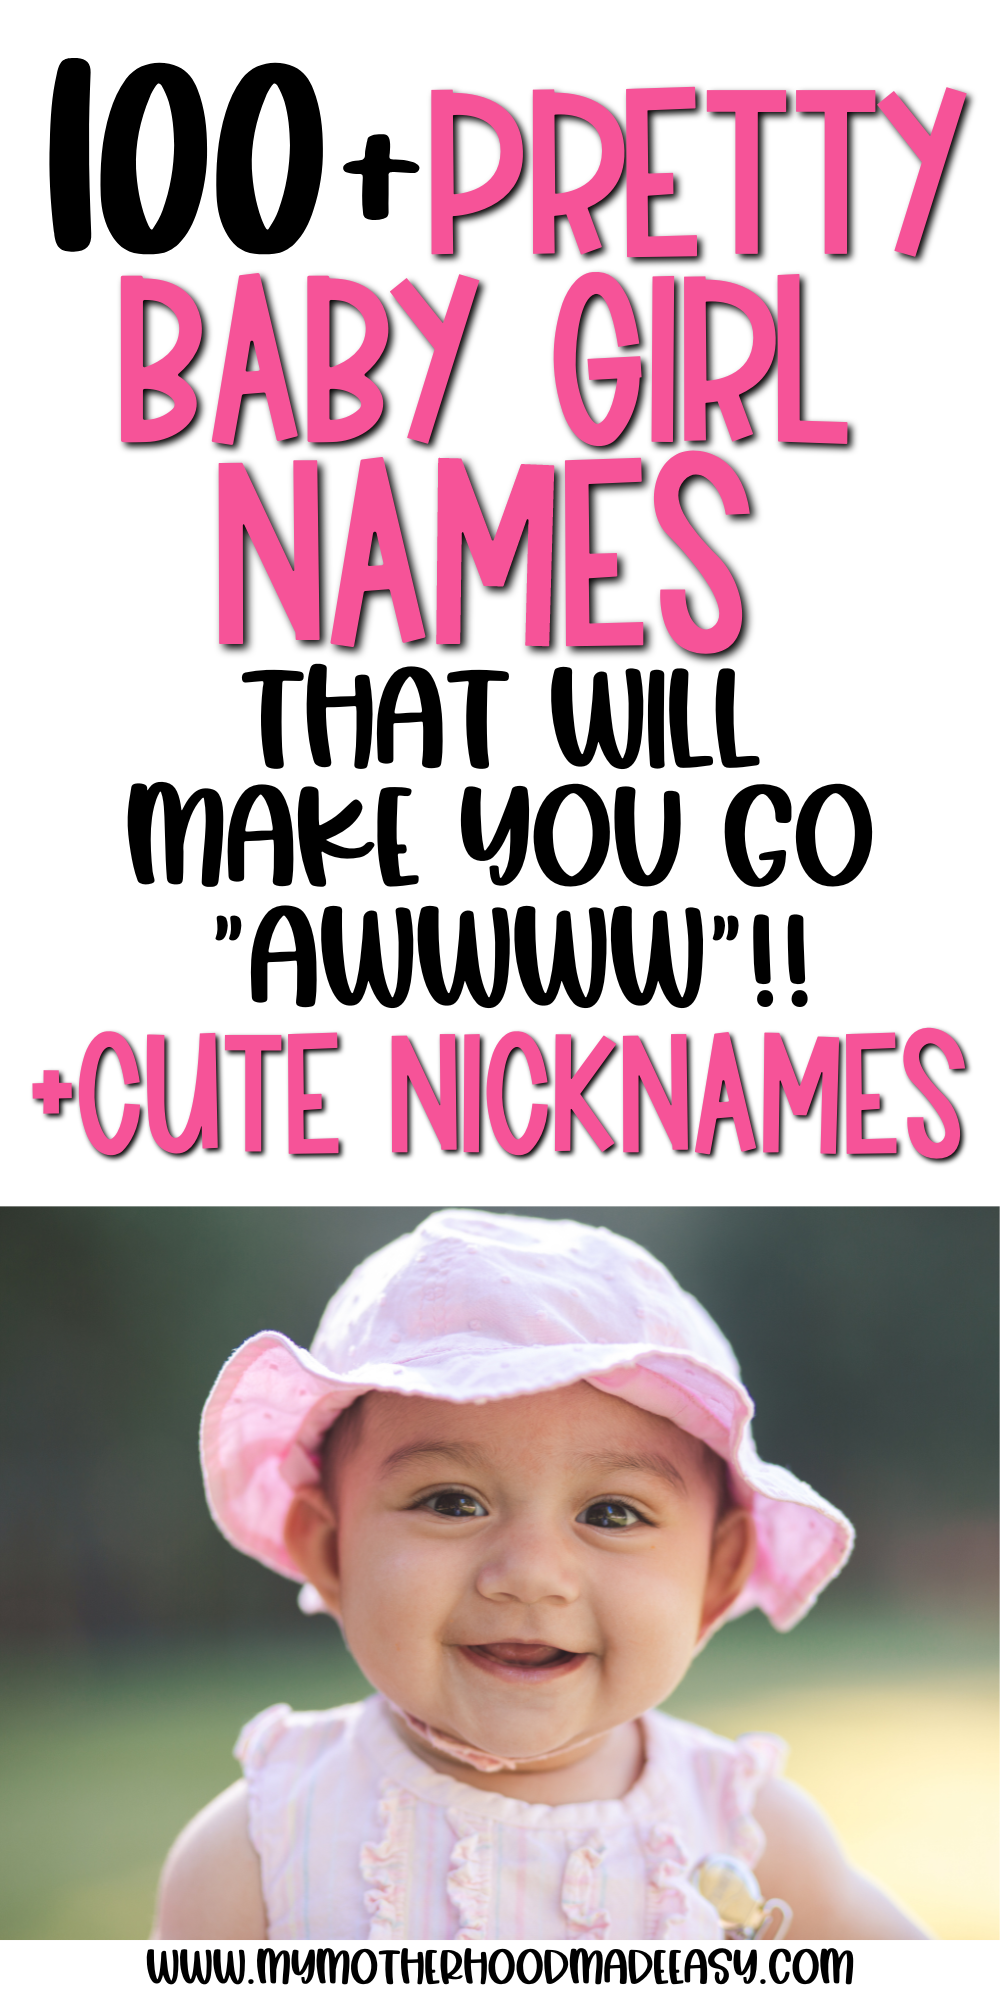 Looking for the perfect Pretty baby Girl name to give to your new blessing coming soon? Here is a list of 100+ Pretty babyGirl names to choose from! From popular names like Sophia and Emily, to unique names like Harper and India, you're sure to find the perfect name for your little girl.